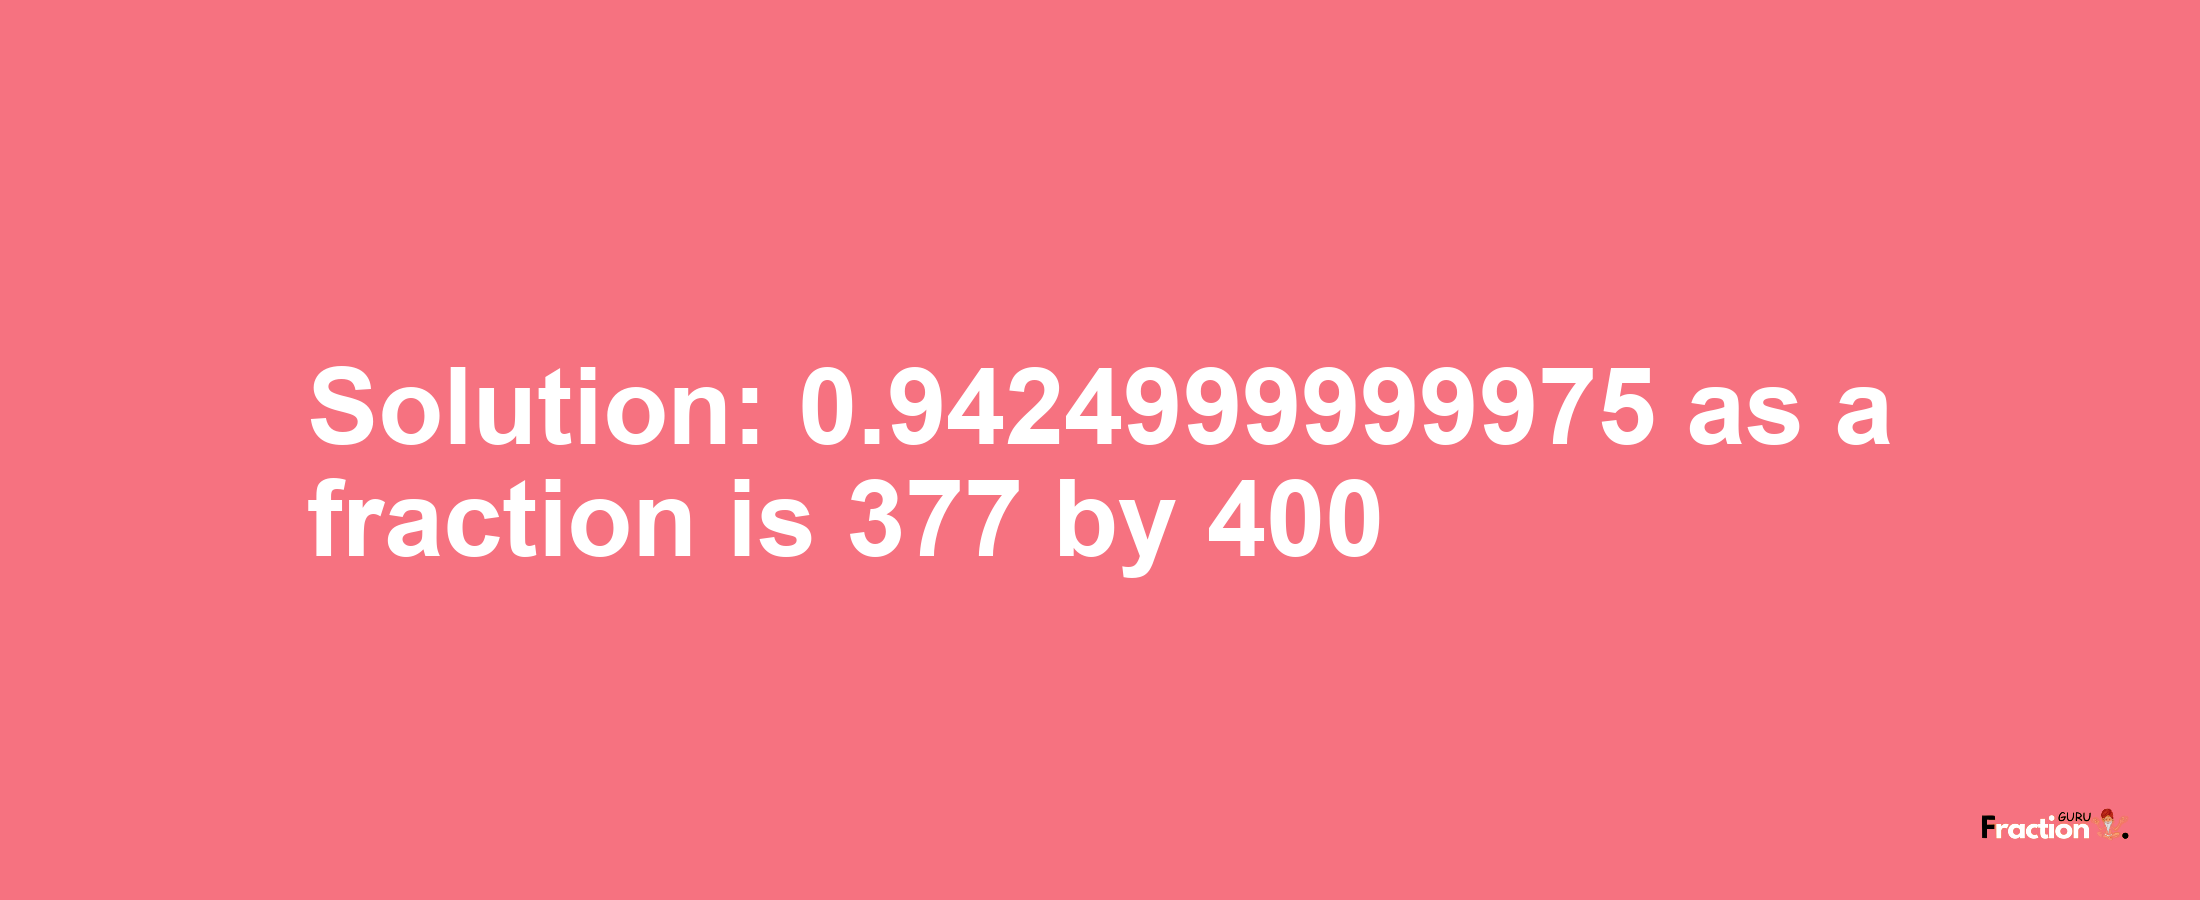 Solution:0.9424999999975 as a fraction is 377/400